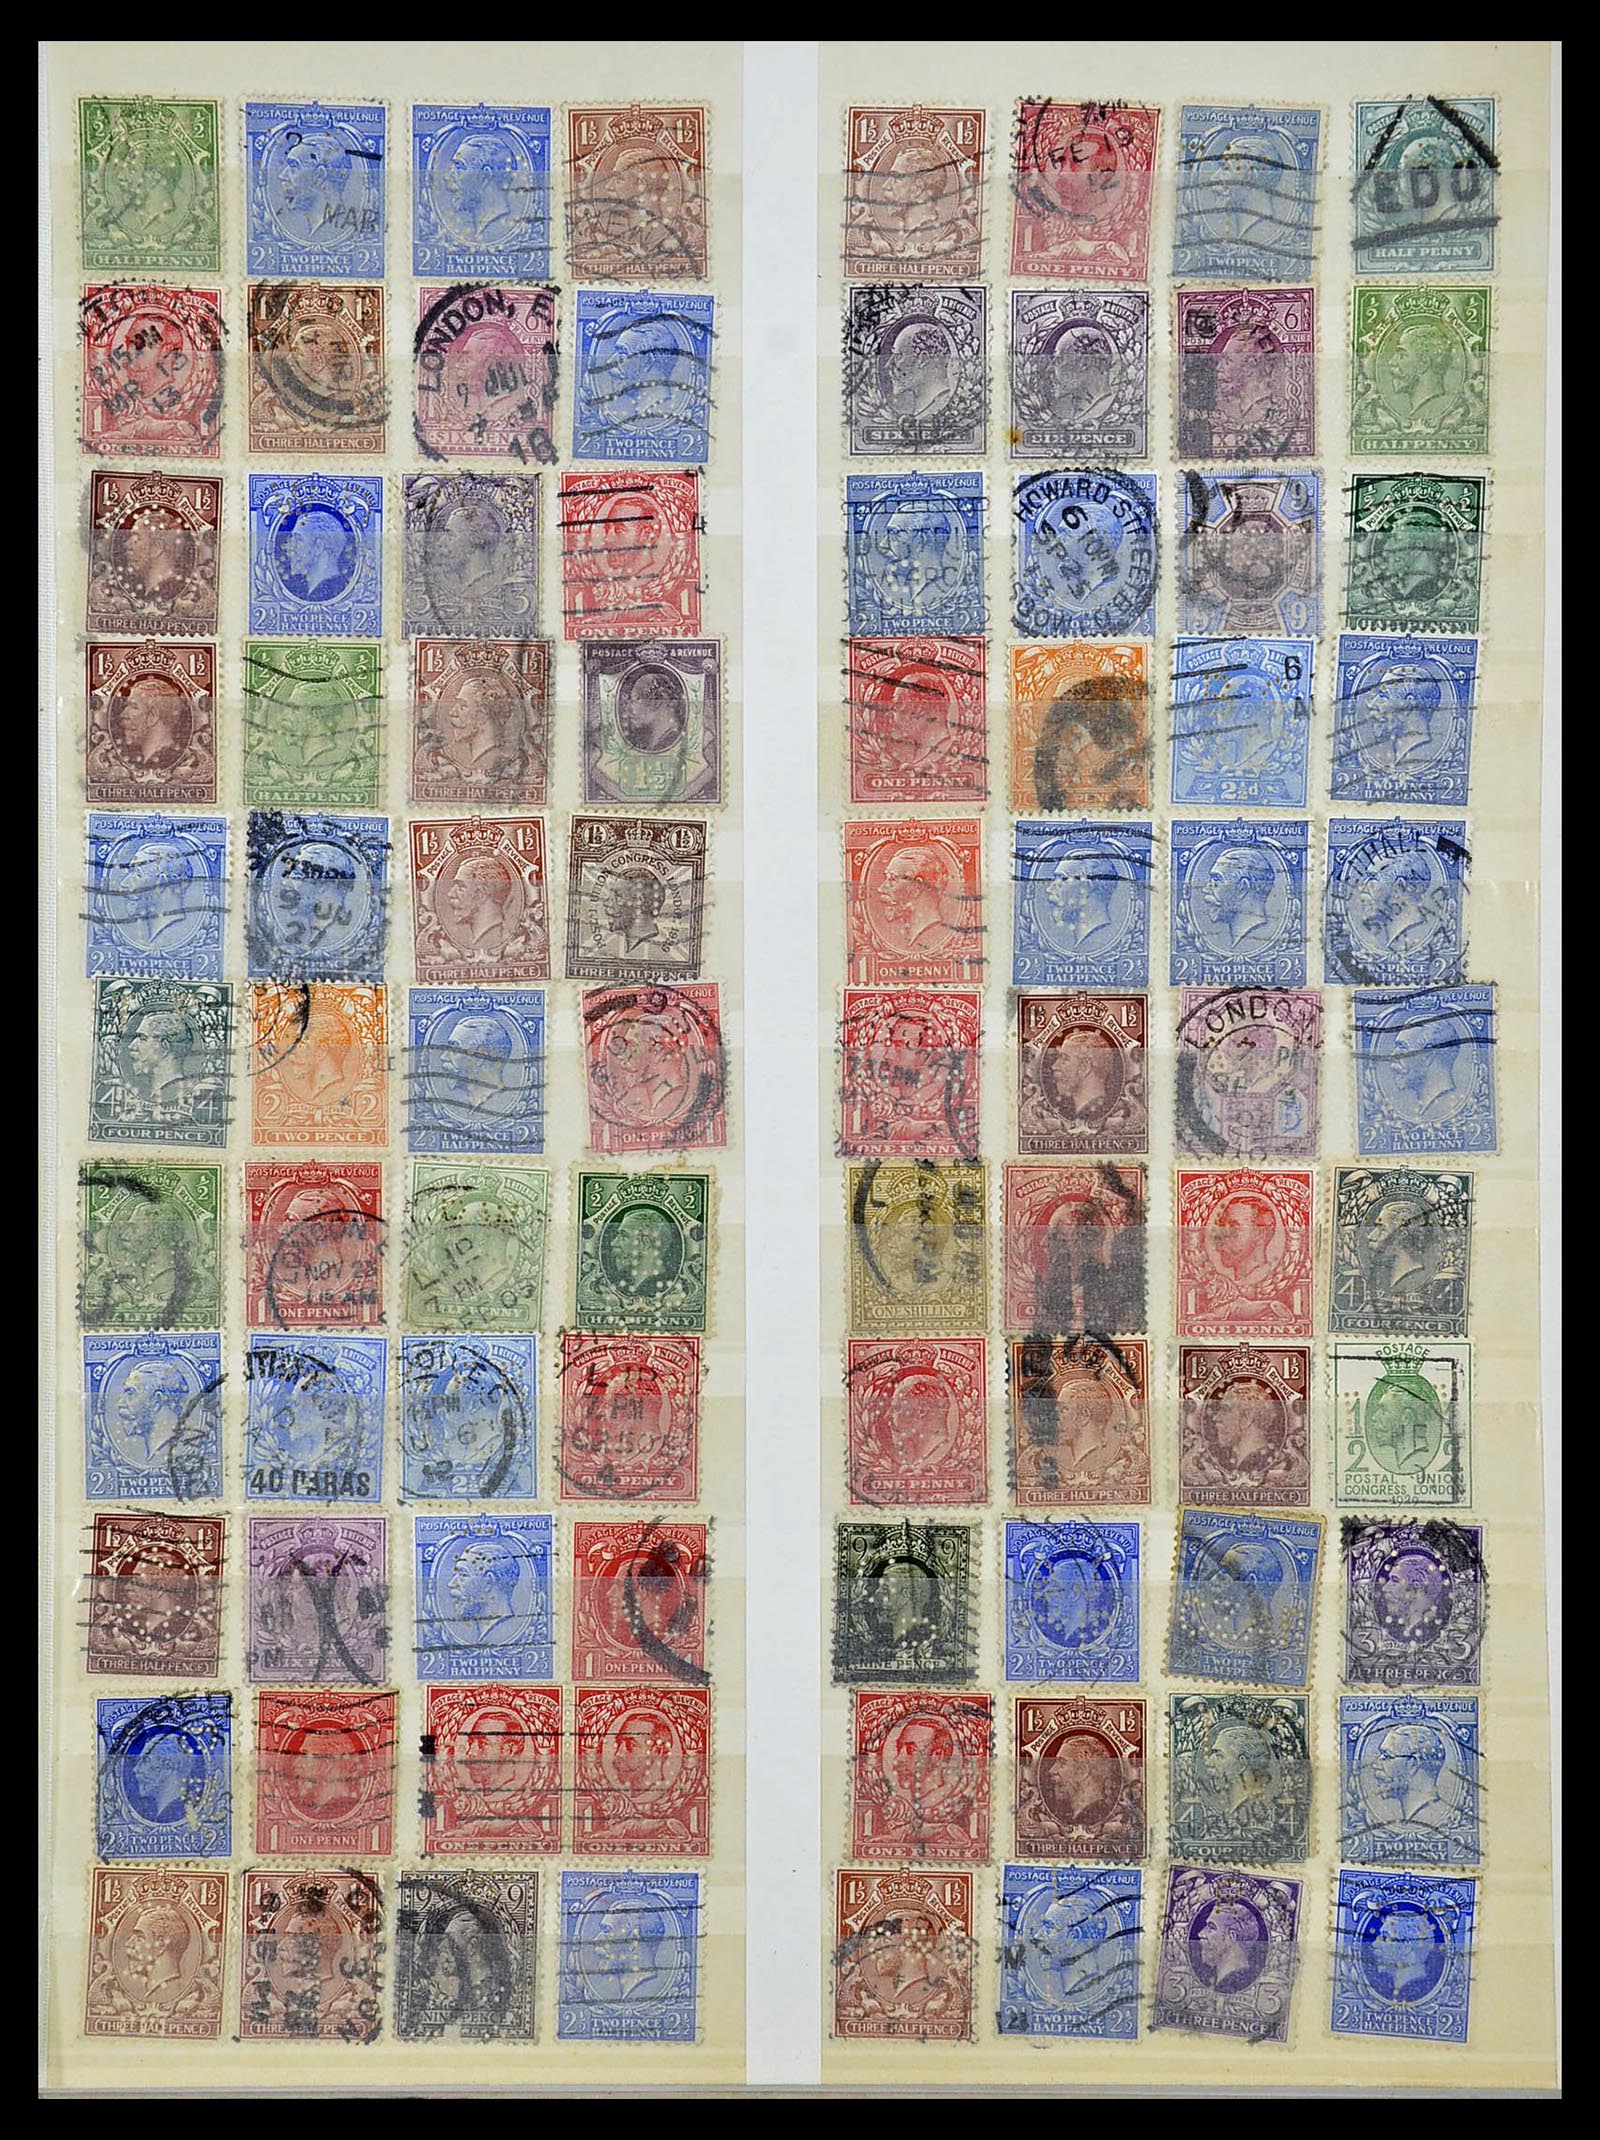 34671 015 - Stamp Collection 34671 Great Britain perfins 1902-1935.